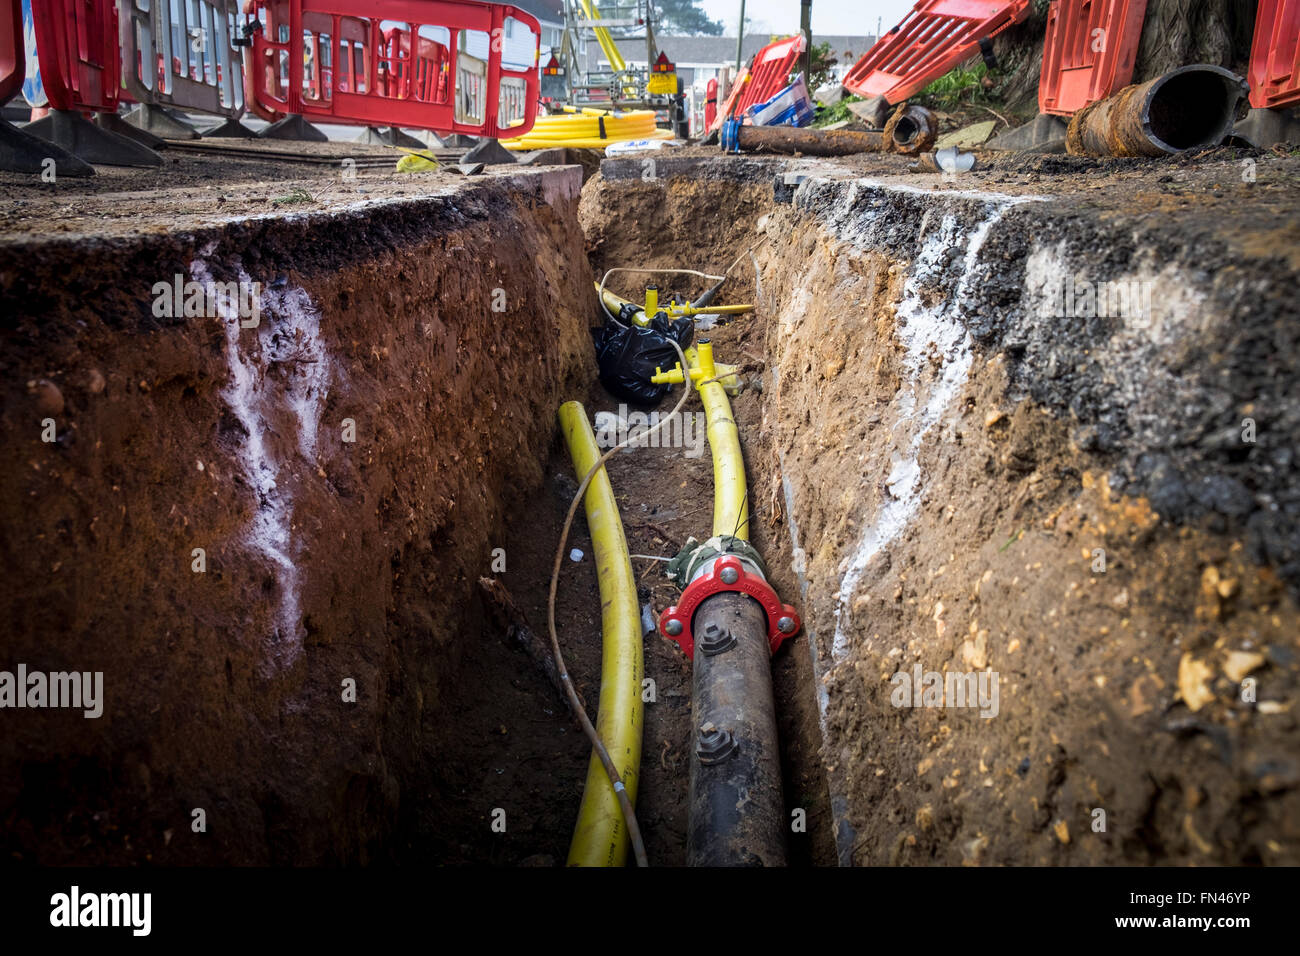 Old metal gas mains pipes being replaced with plastic pipes to prevent gas leaks due to corrosion of the metal pipes Stock Photo